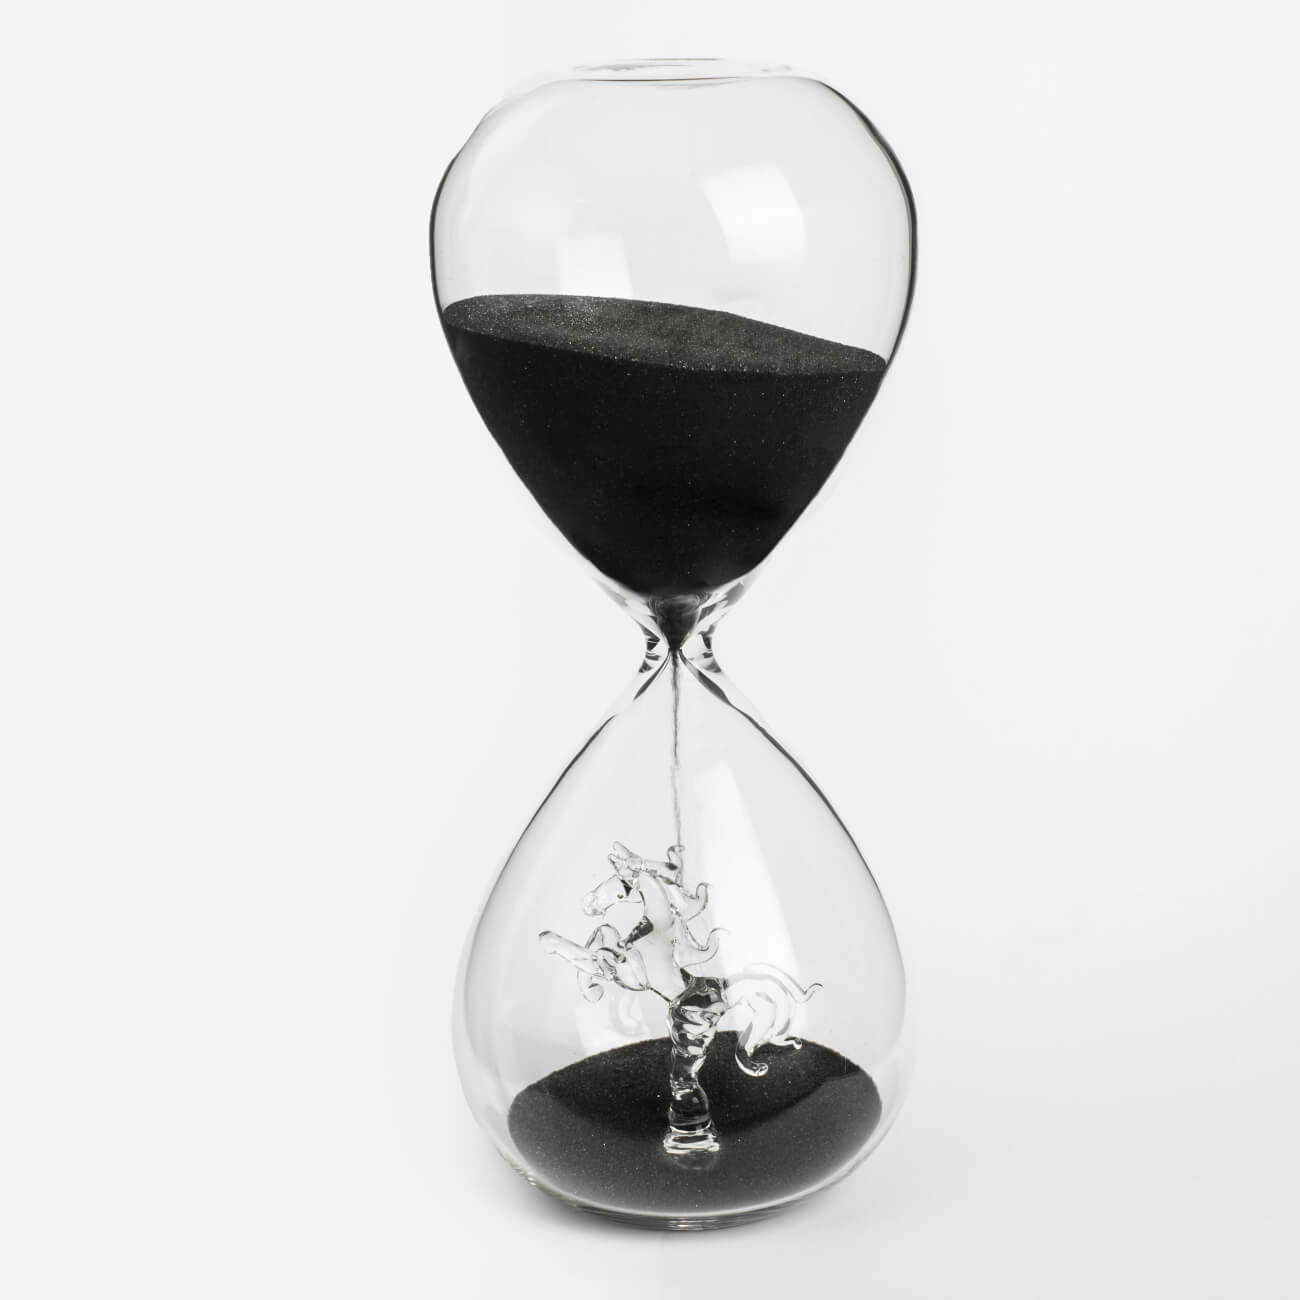 Hourglass clock, 20 cm, 15 minutes, Glass / sand, Horse in the sand, Sand time изображение № 1